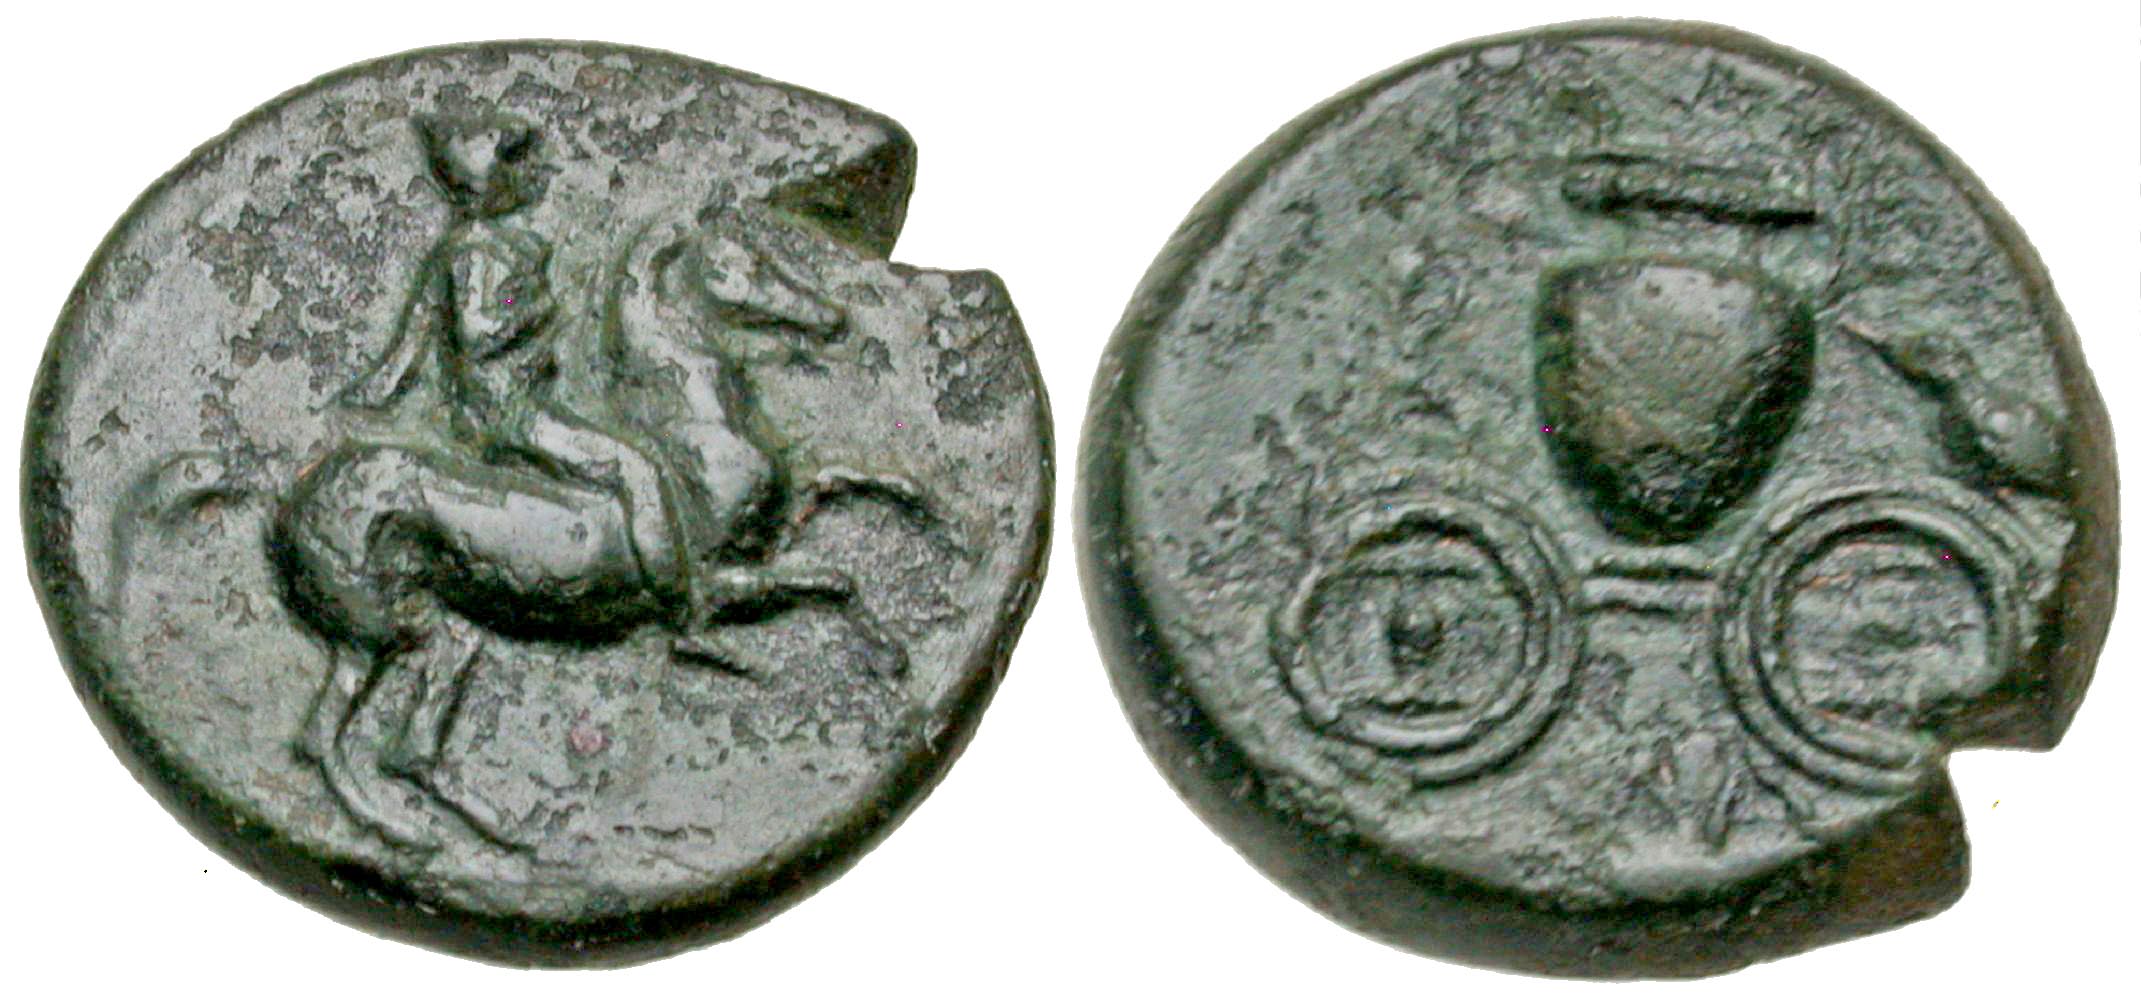 Thessaly, Krannon. 4th century BC AE dichalkon. Ex BCD Collection. 